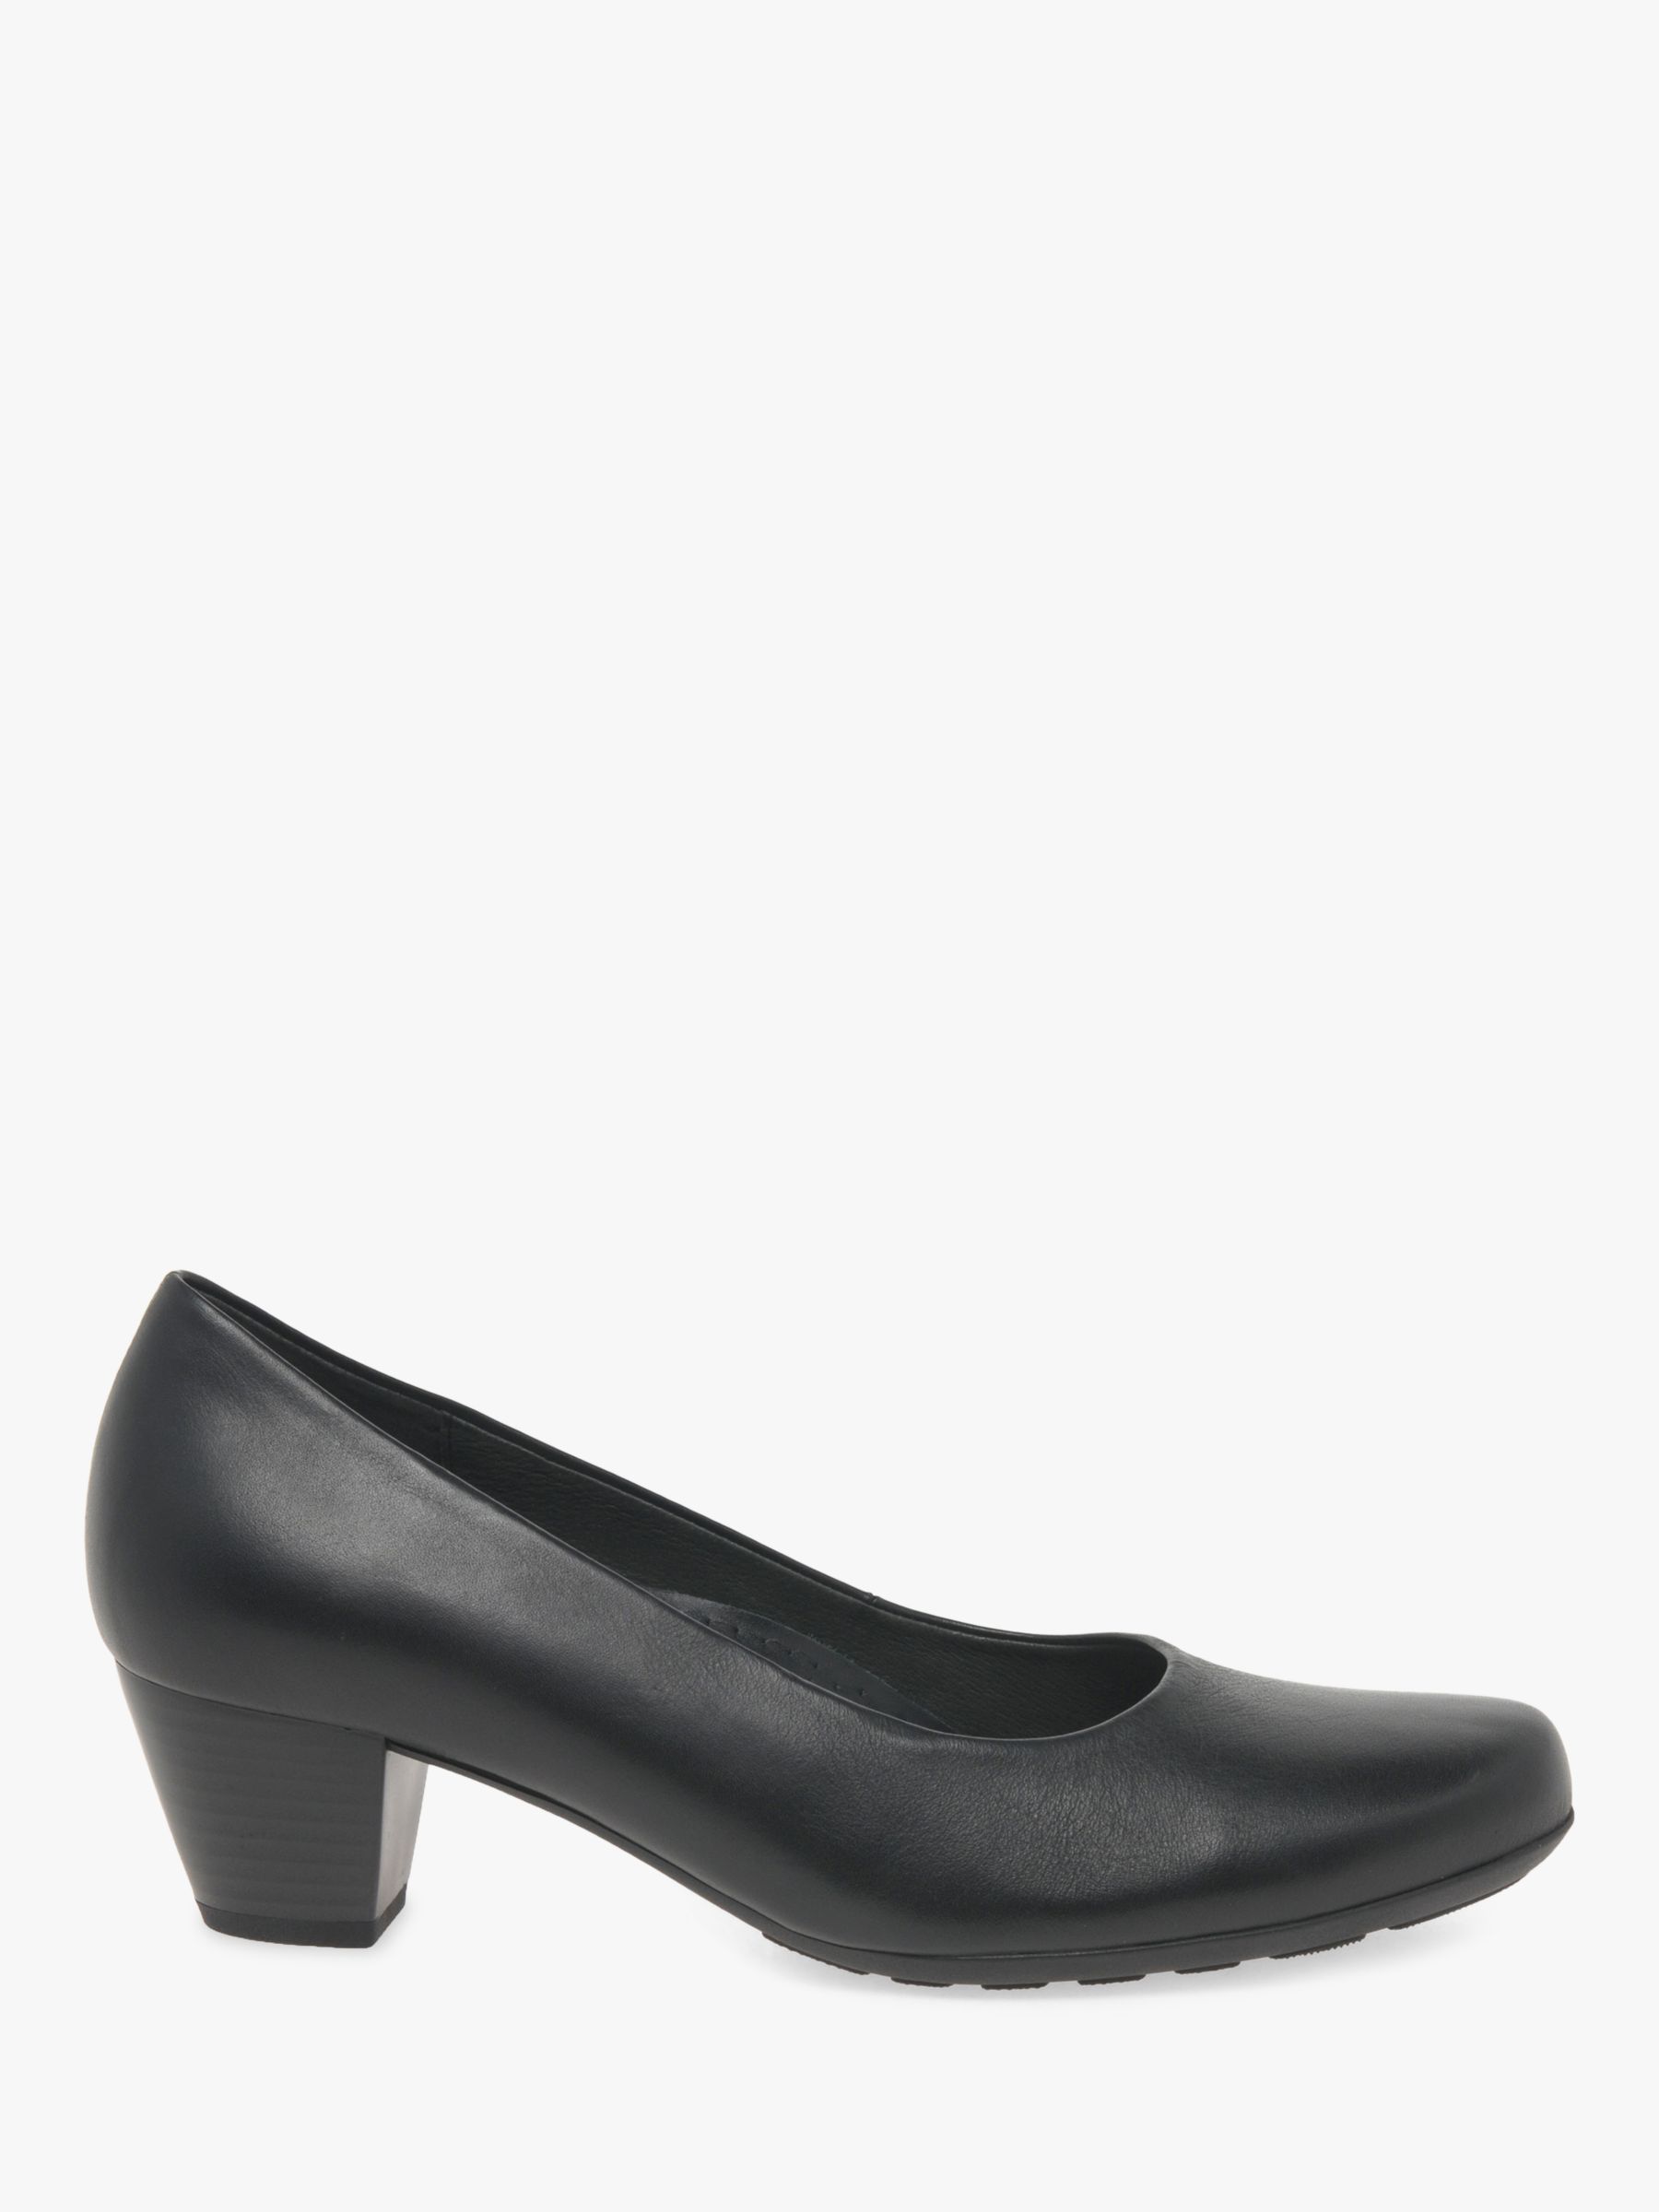 Gabor Wide Fit Leather Court Shoes, Black at Lewis Partners